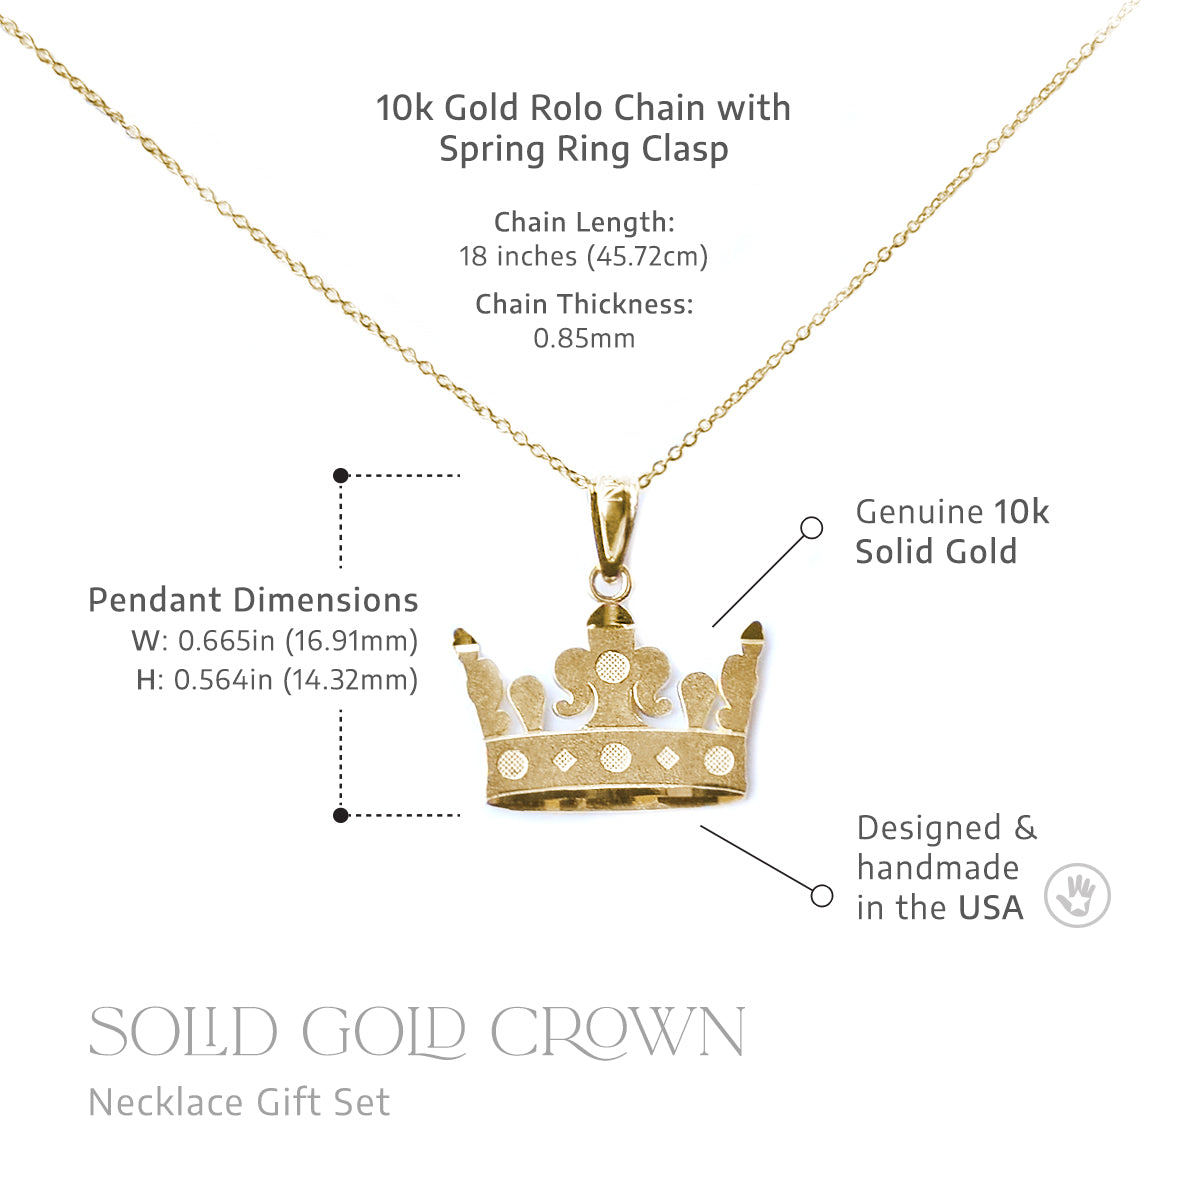 To My Badass Daughter - Solid Gold Crown Necklace Gift Set